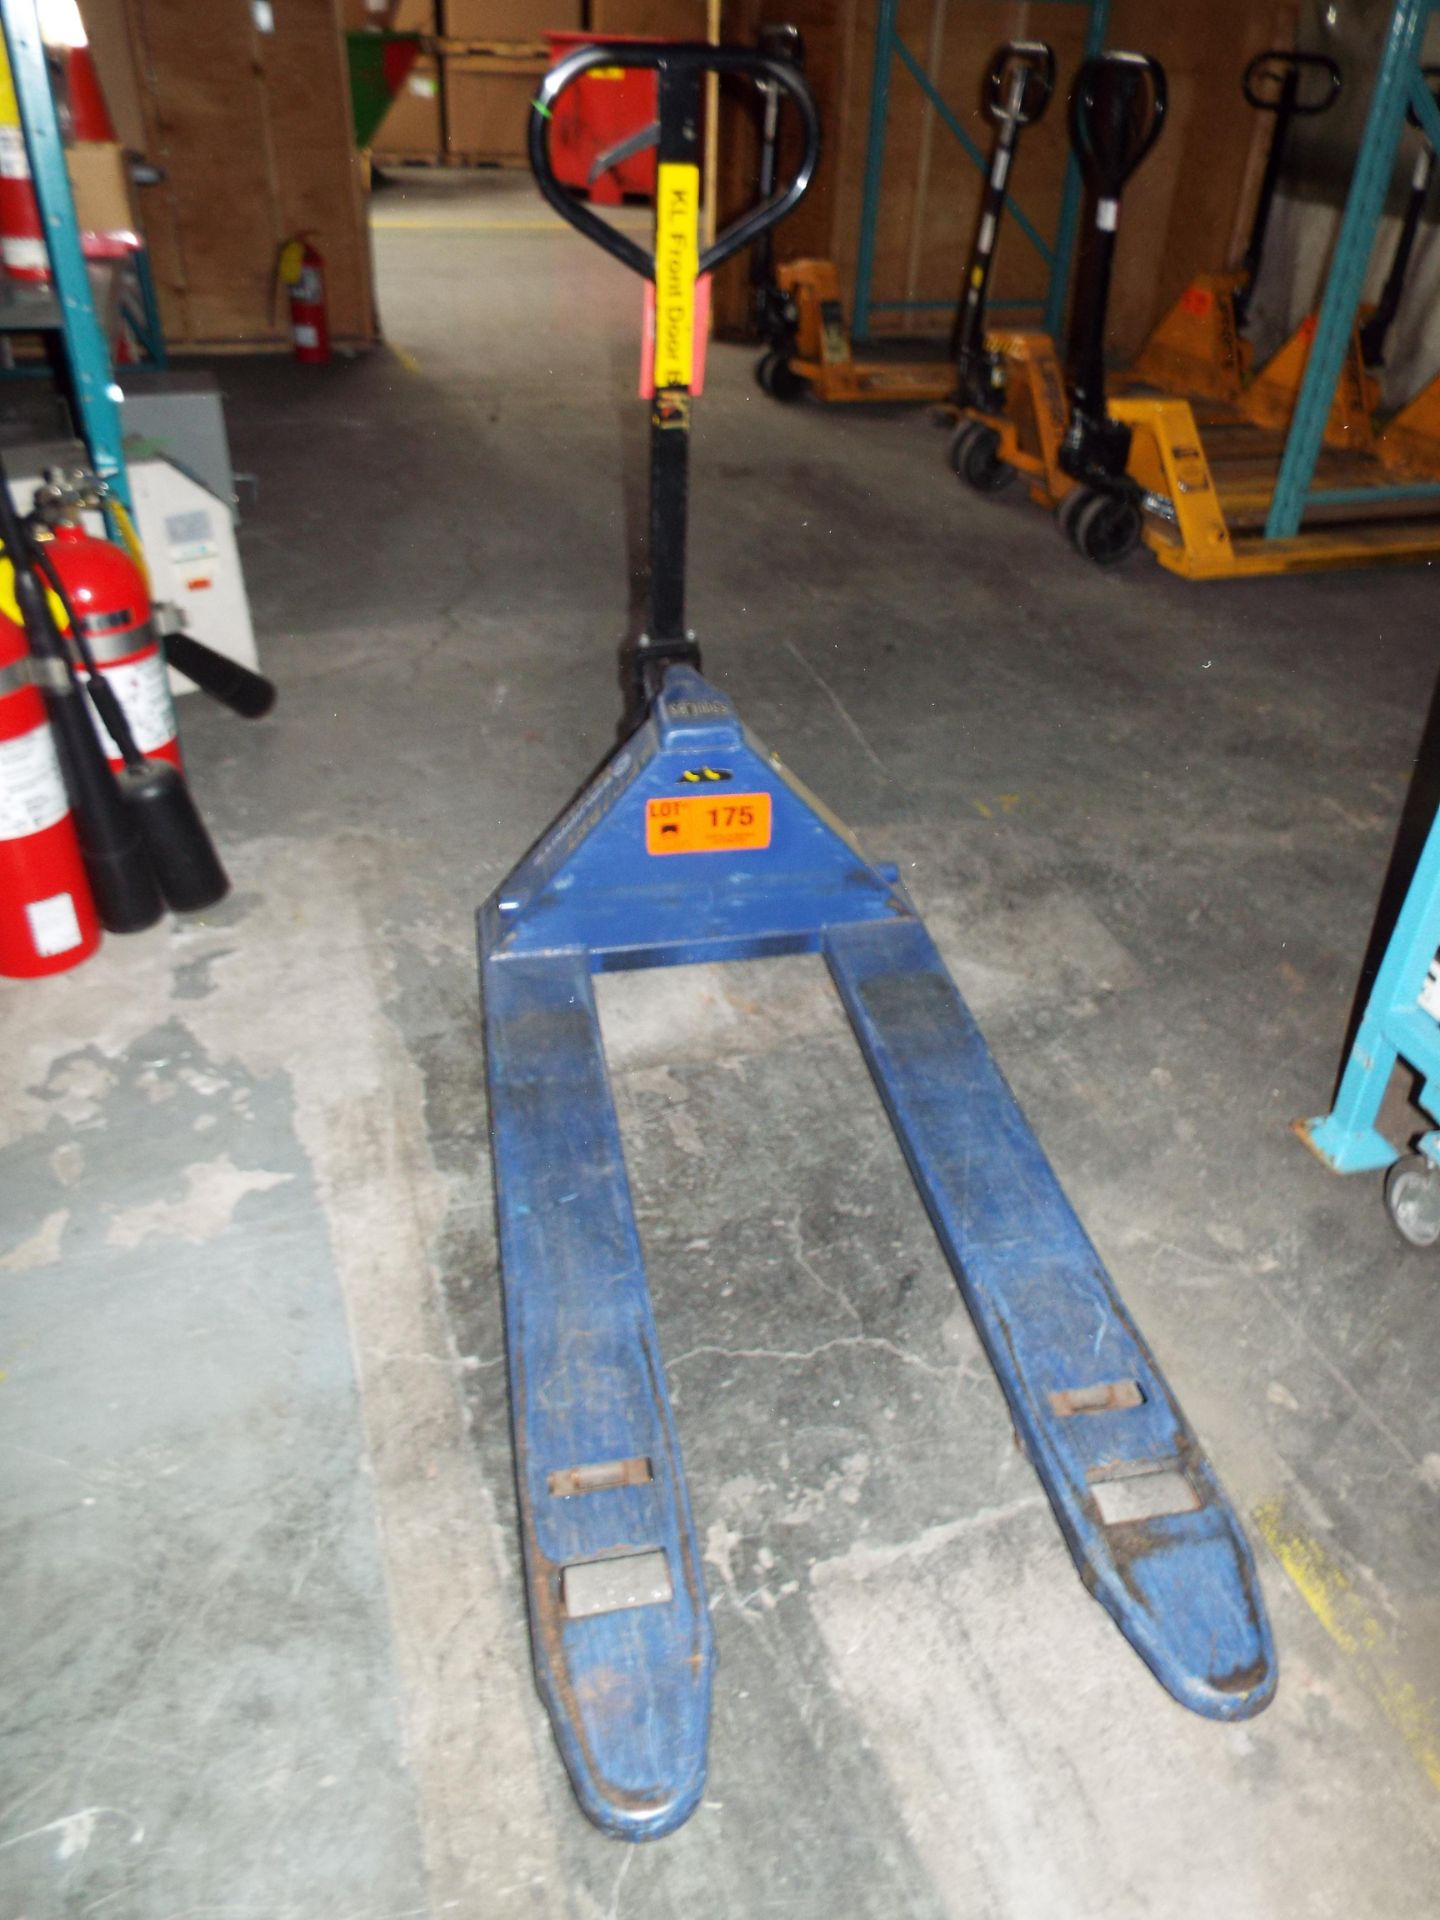 HYDRAULIC PALLET JACK WITH 5,000LB CAPACITY, S/N: N/A (NOT IN SERVICE)